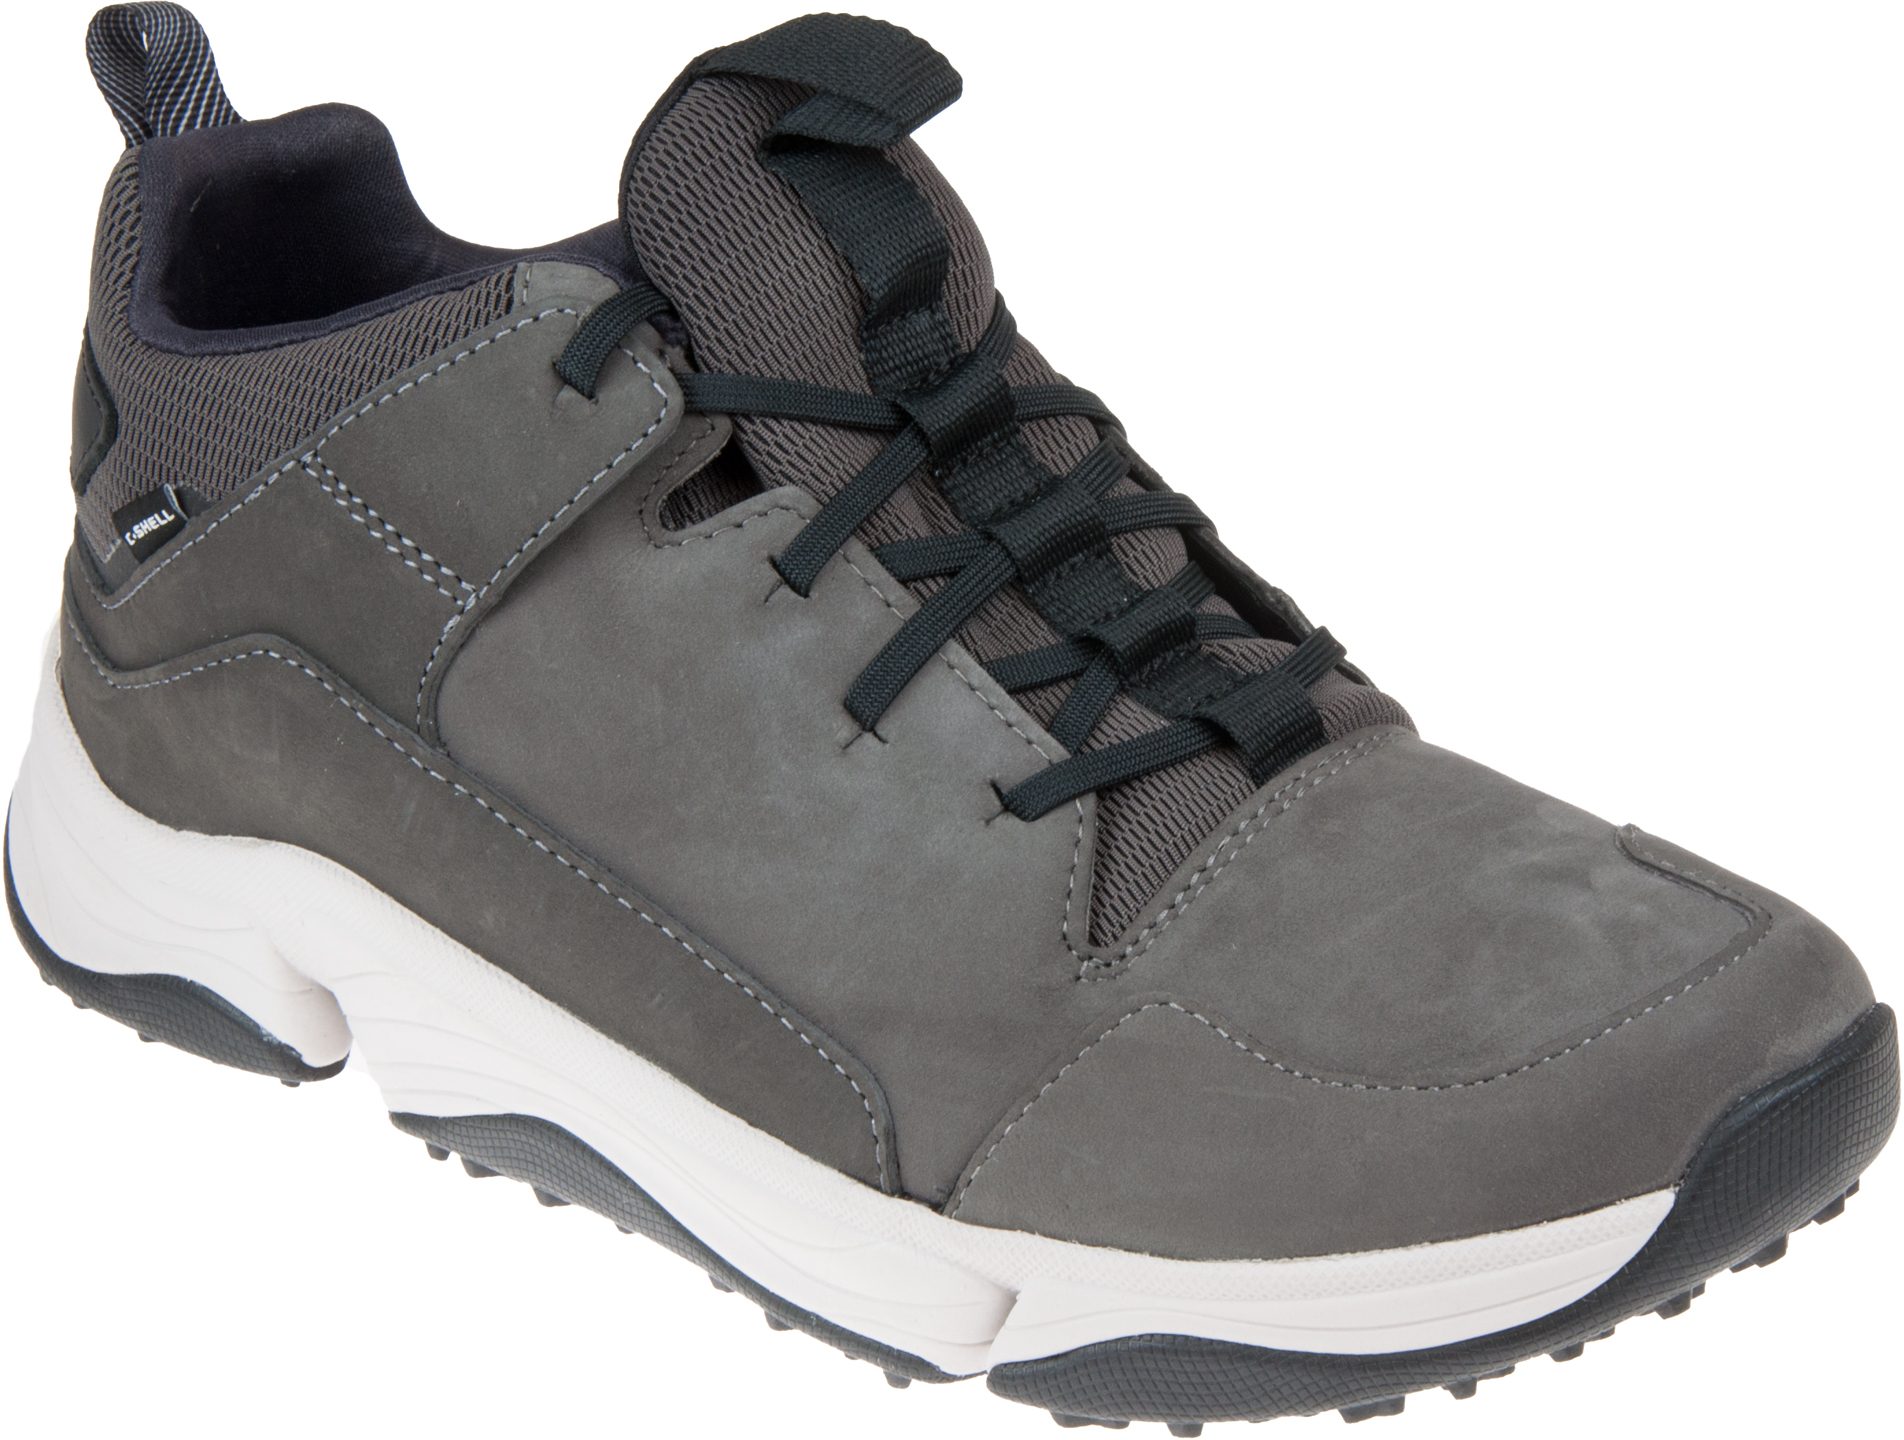 Clarks Tri Path Mid Dark Grey Combi Casual Shoes - Humphries Shoes